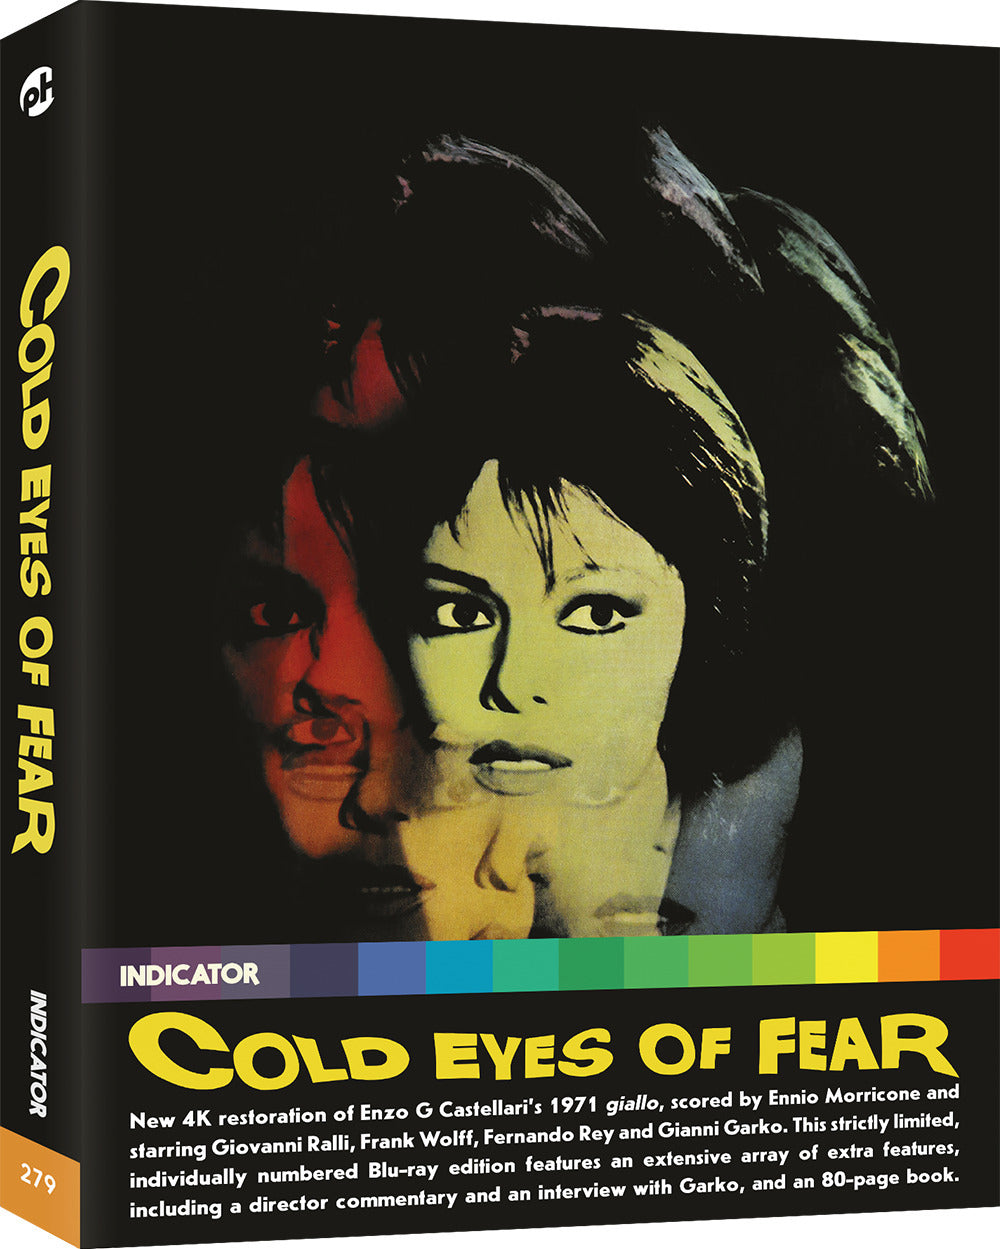 COLD EYES OF FEAR (LIMITED EDITION) BLU-RAY